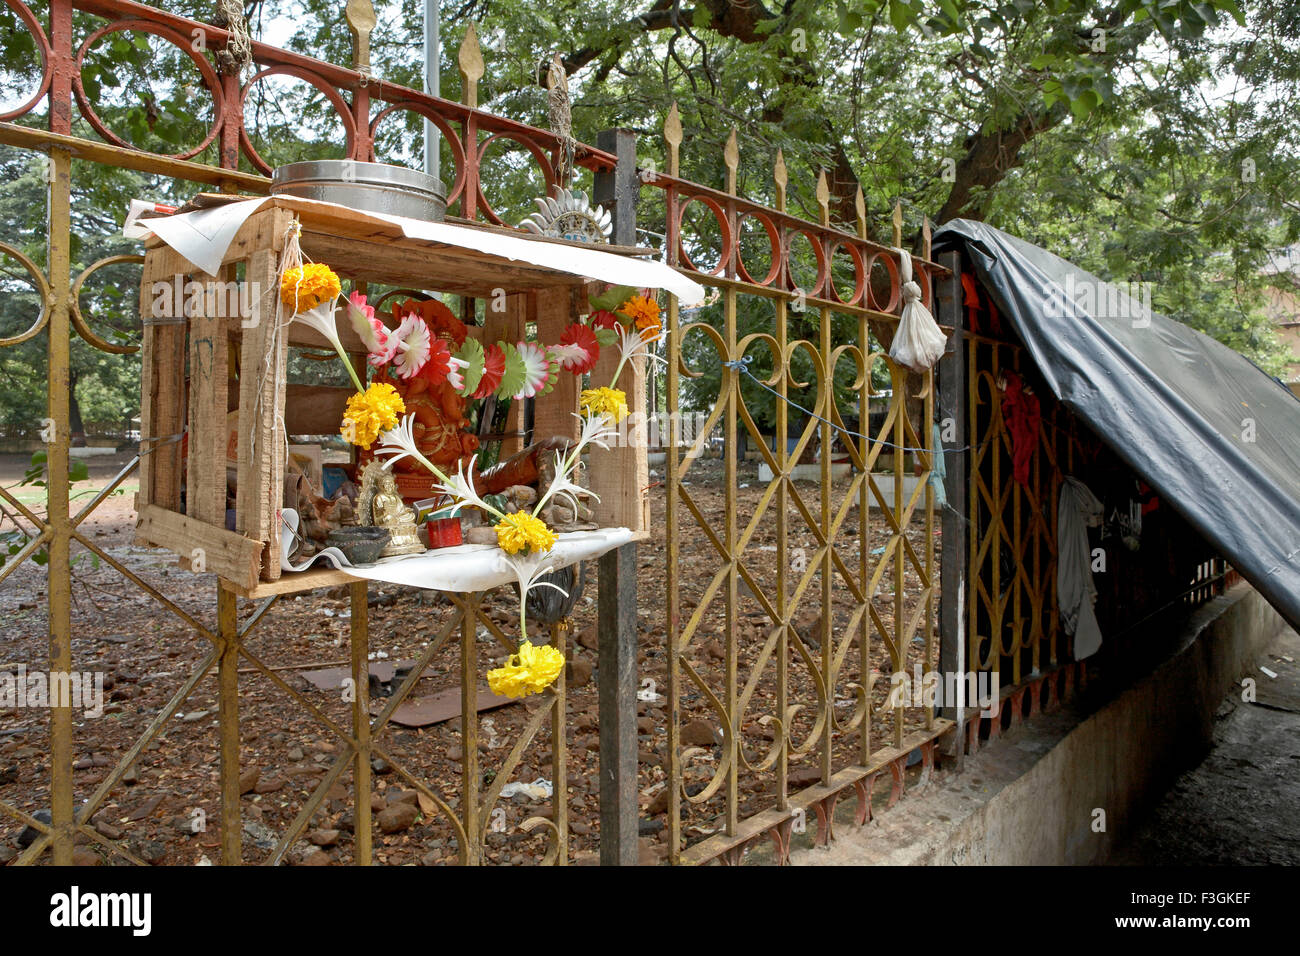 shrine in a wooden box hung on the fence of a playground ensures cleanliness surrounding Mumbai Bombay Stock Photo